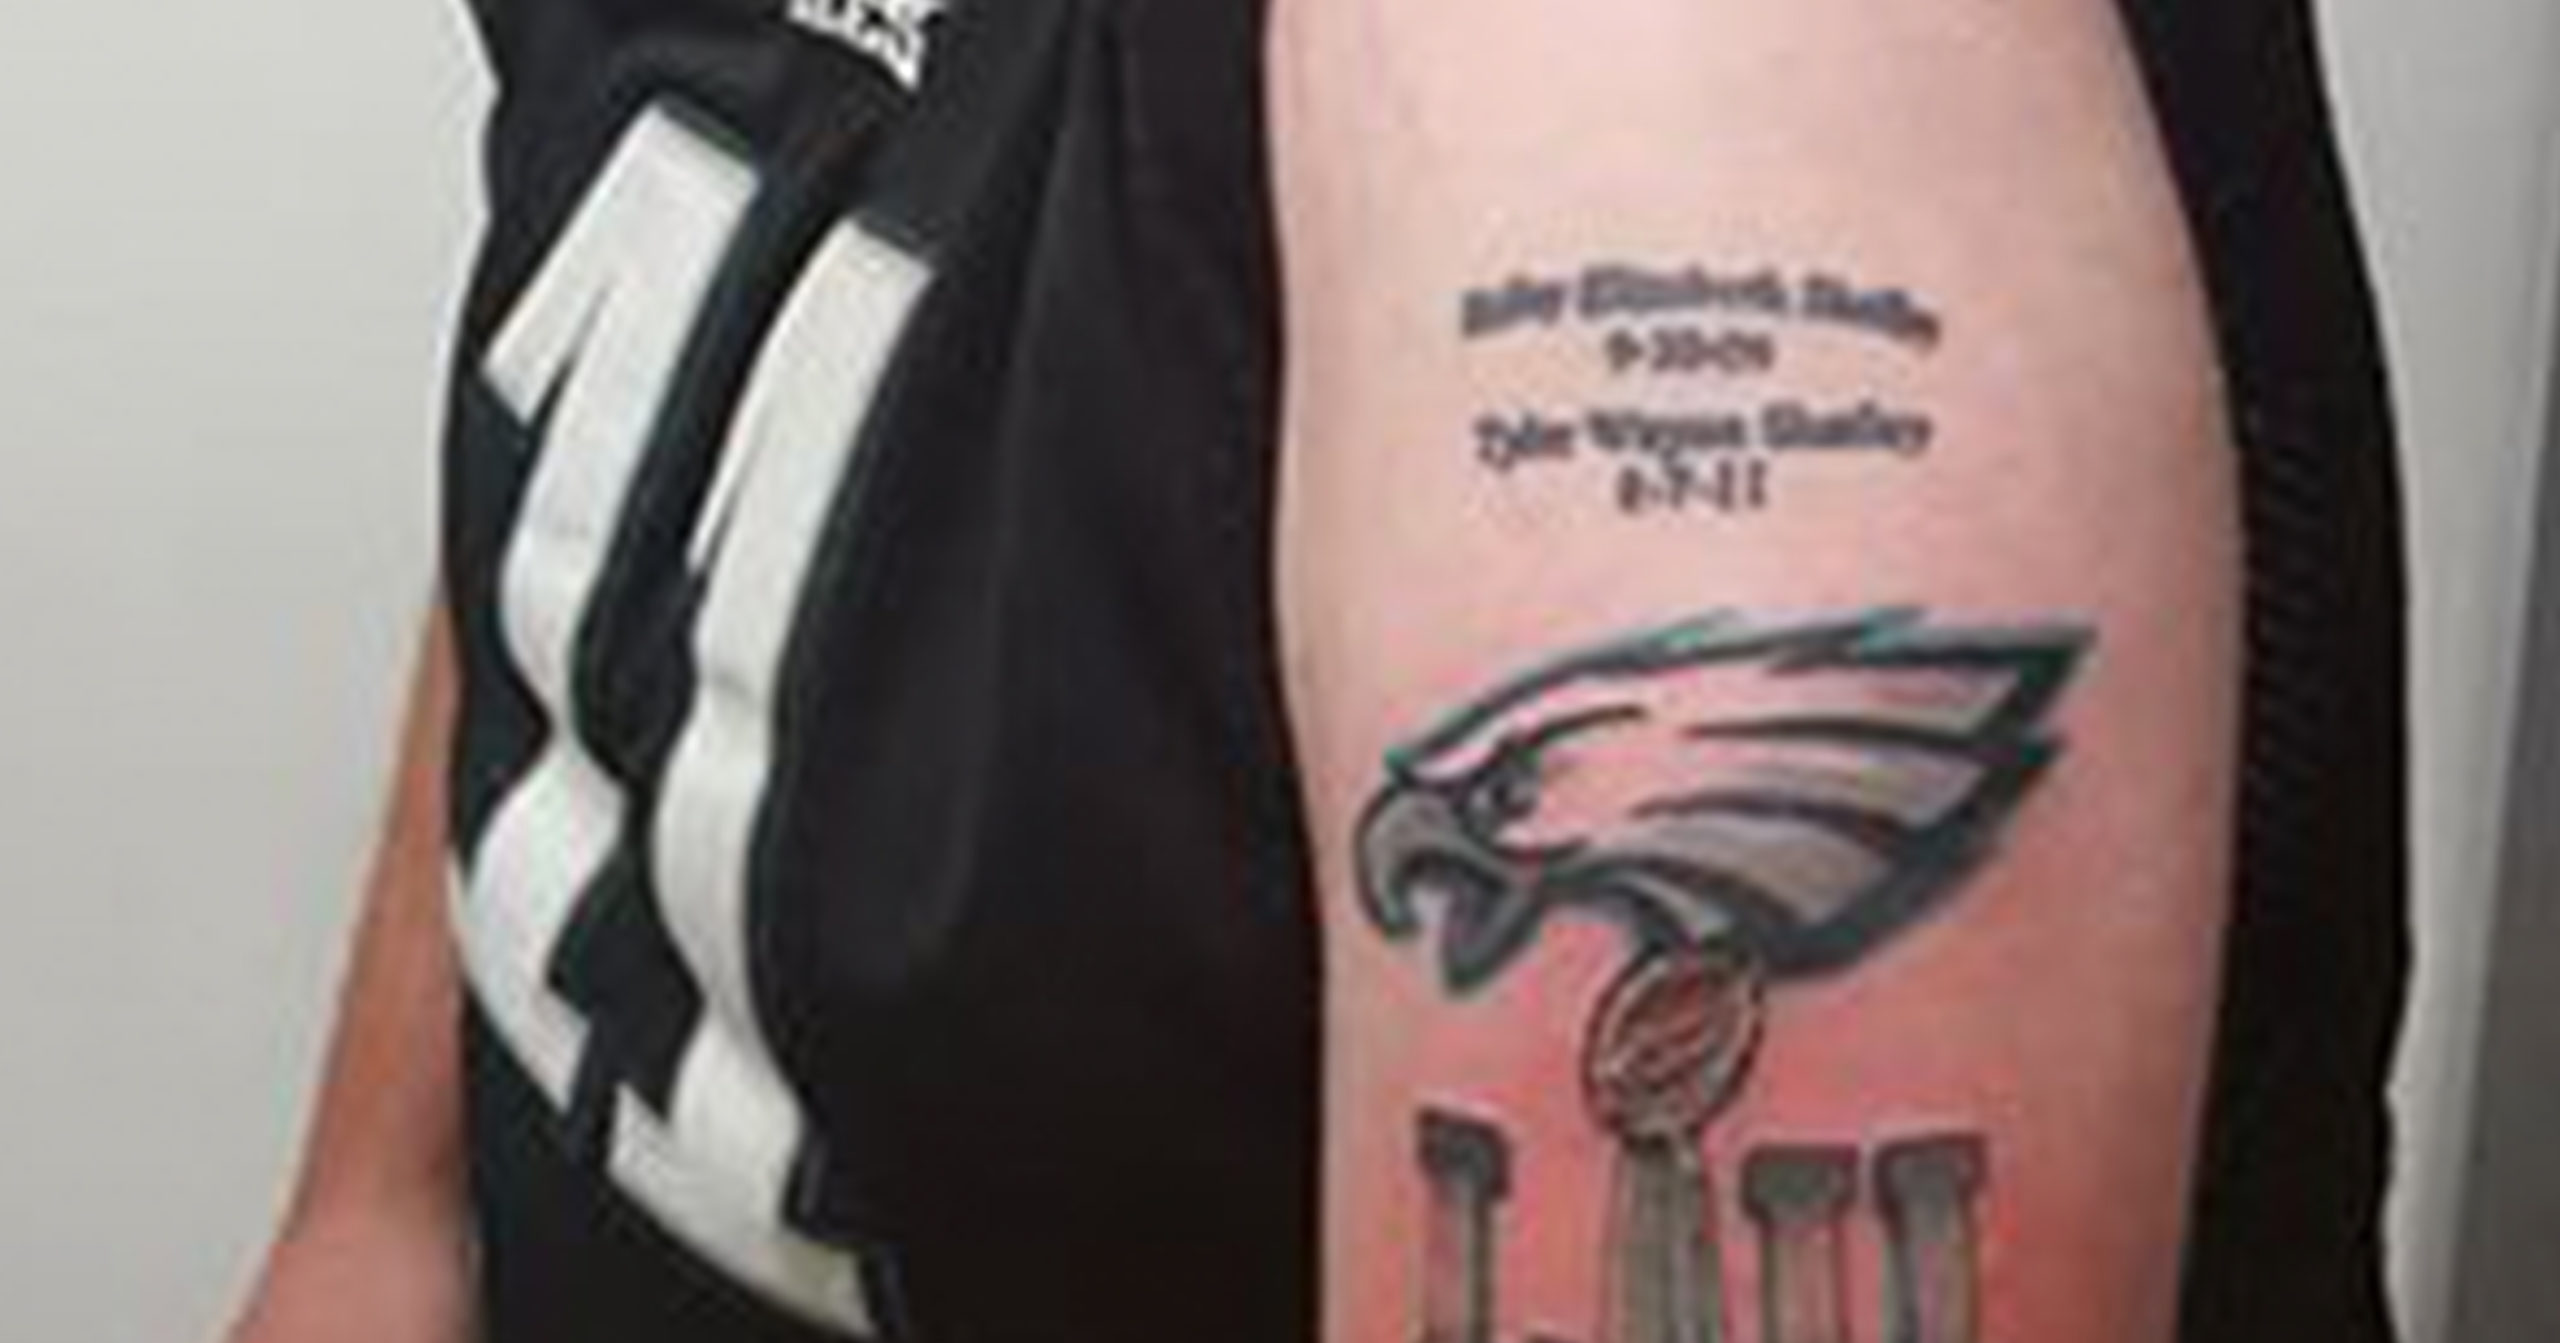 Superbowl Sunday 🦅💚 my tattoo I got Sept 2019 in Philly